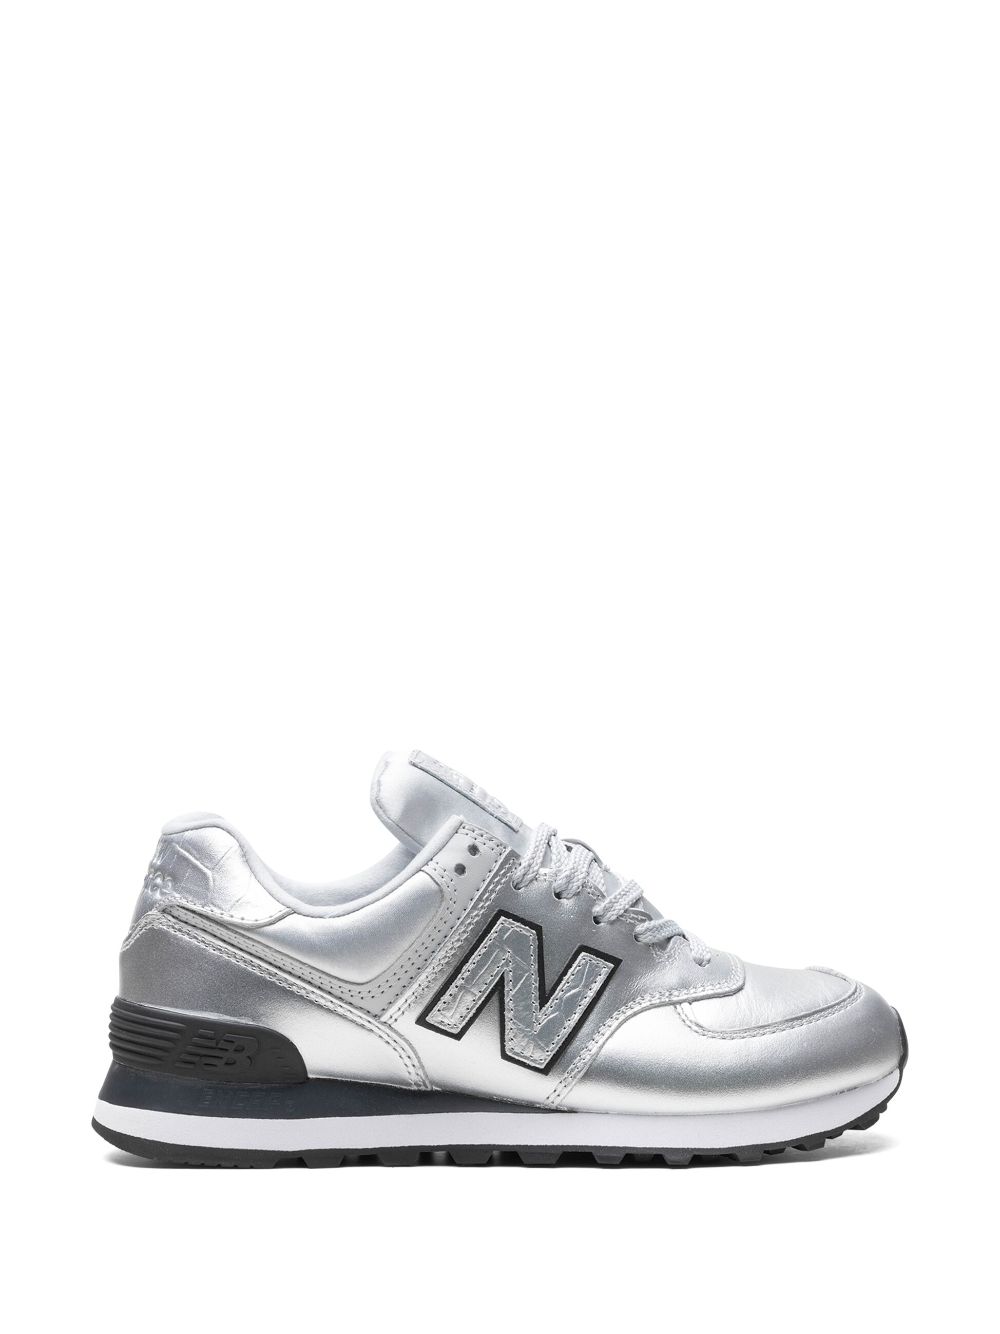 New Balance 574 leather sneakers - Silver von New Balance